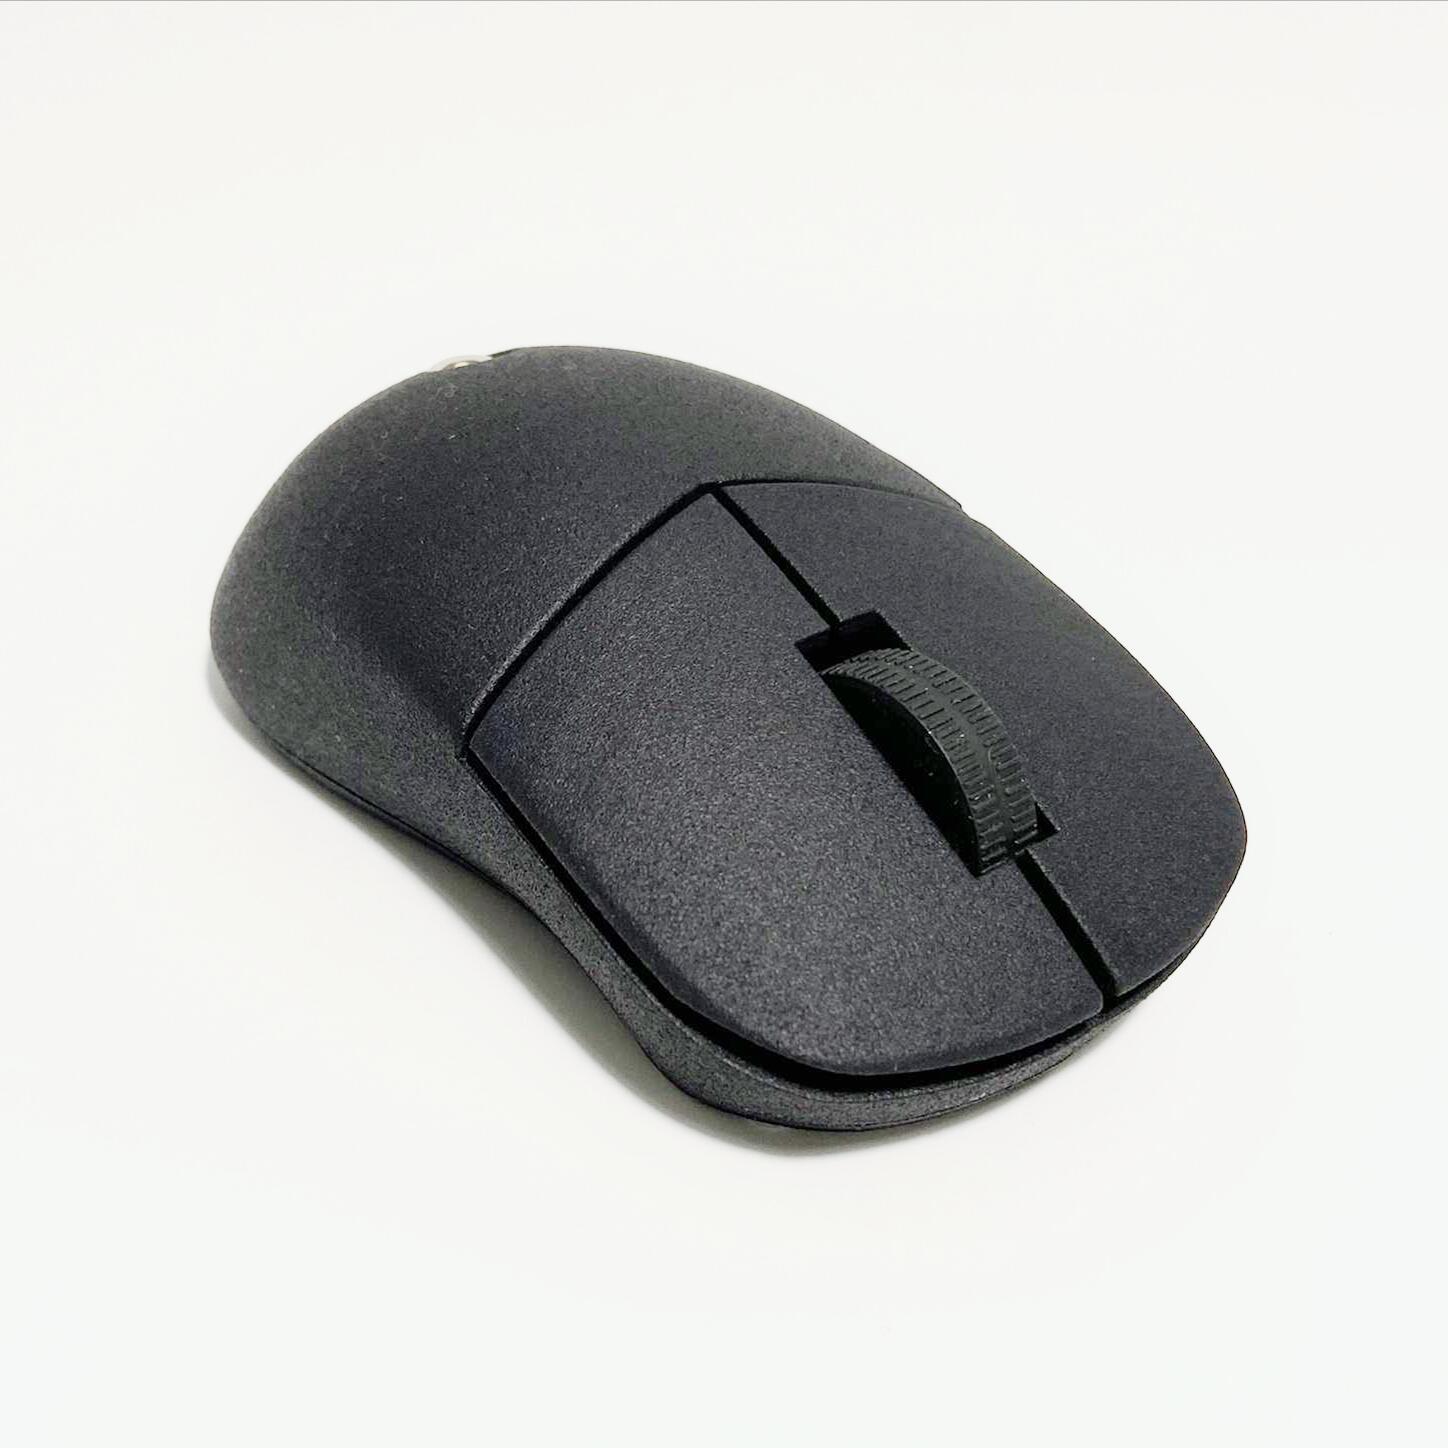 ZS-N1, FDM 3D Printed Asymmetric G305 Wireless Mouse Mod, NP-01s inspired :  r/MouseReview